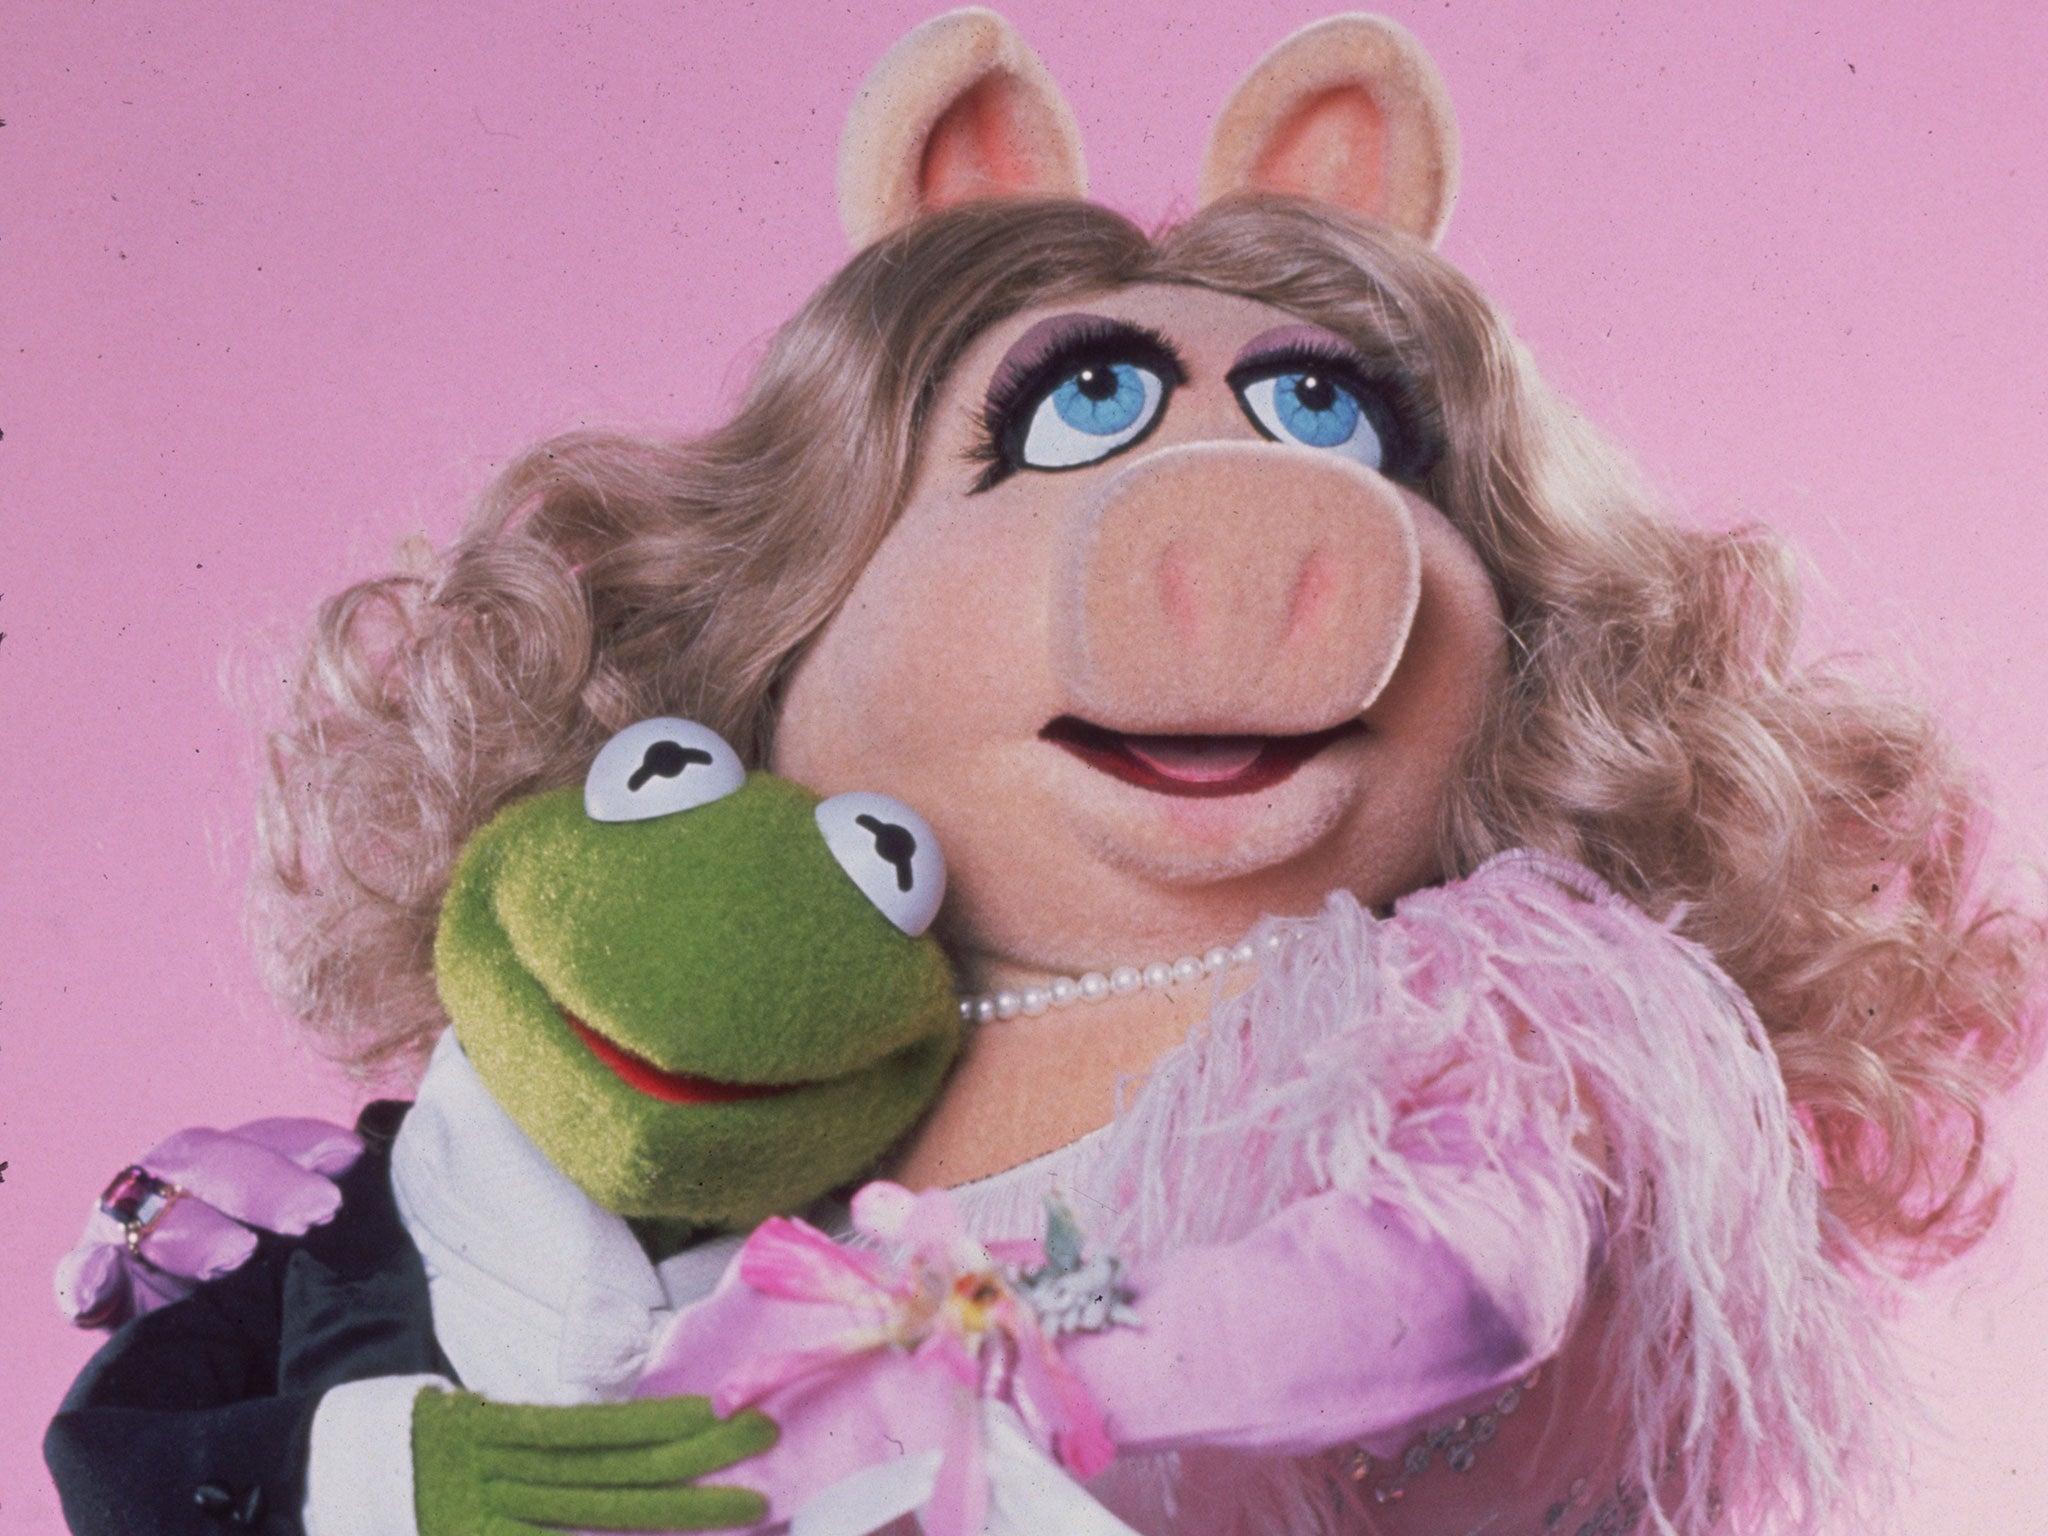 Miss Piggy and Kermit have split up, in latest